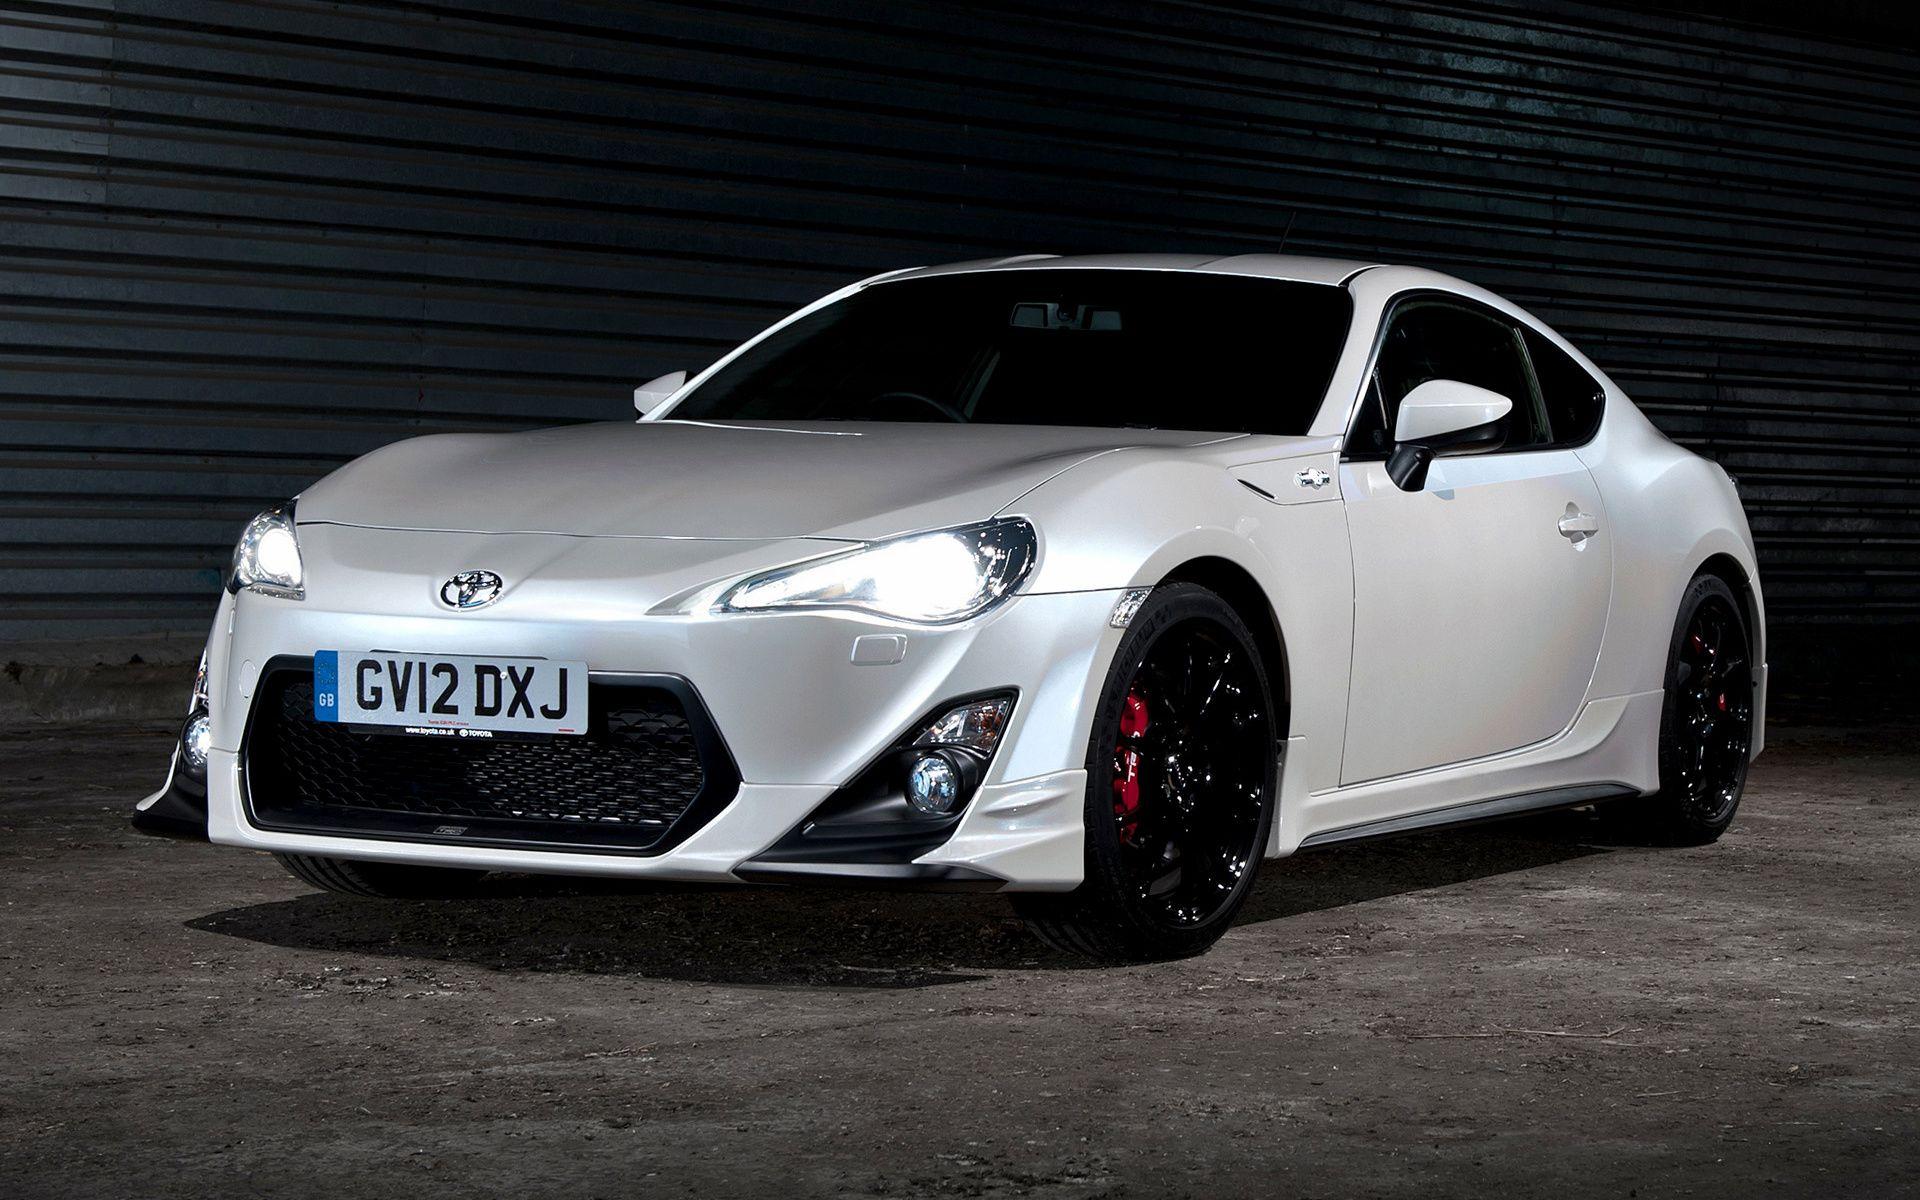 TRD Toyota GT 86 (2013) UK Wallpaper and HD Image